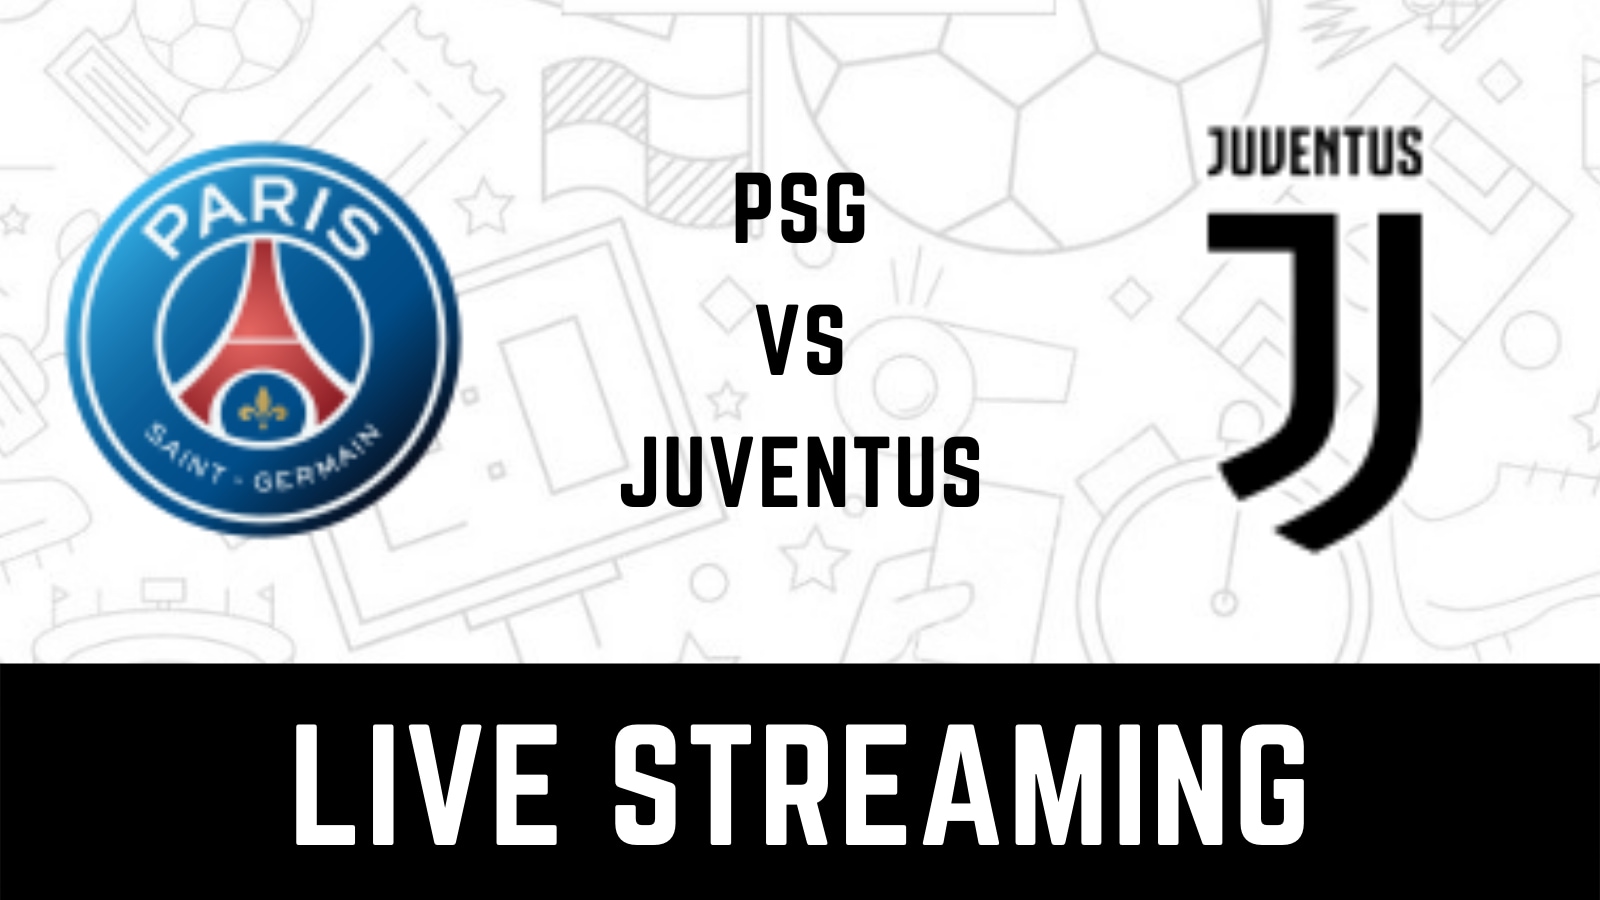 PSG vs Juventus Live Streaming When and Where to watch Paris Saint-Germain vs Juventus UEFA Champions League Live Coverage on Live TV Online